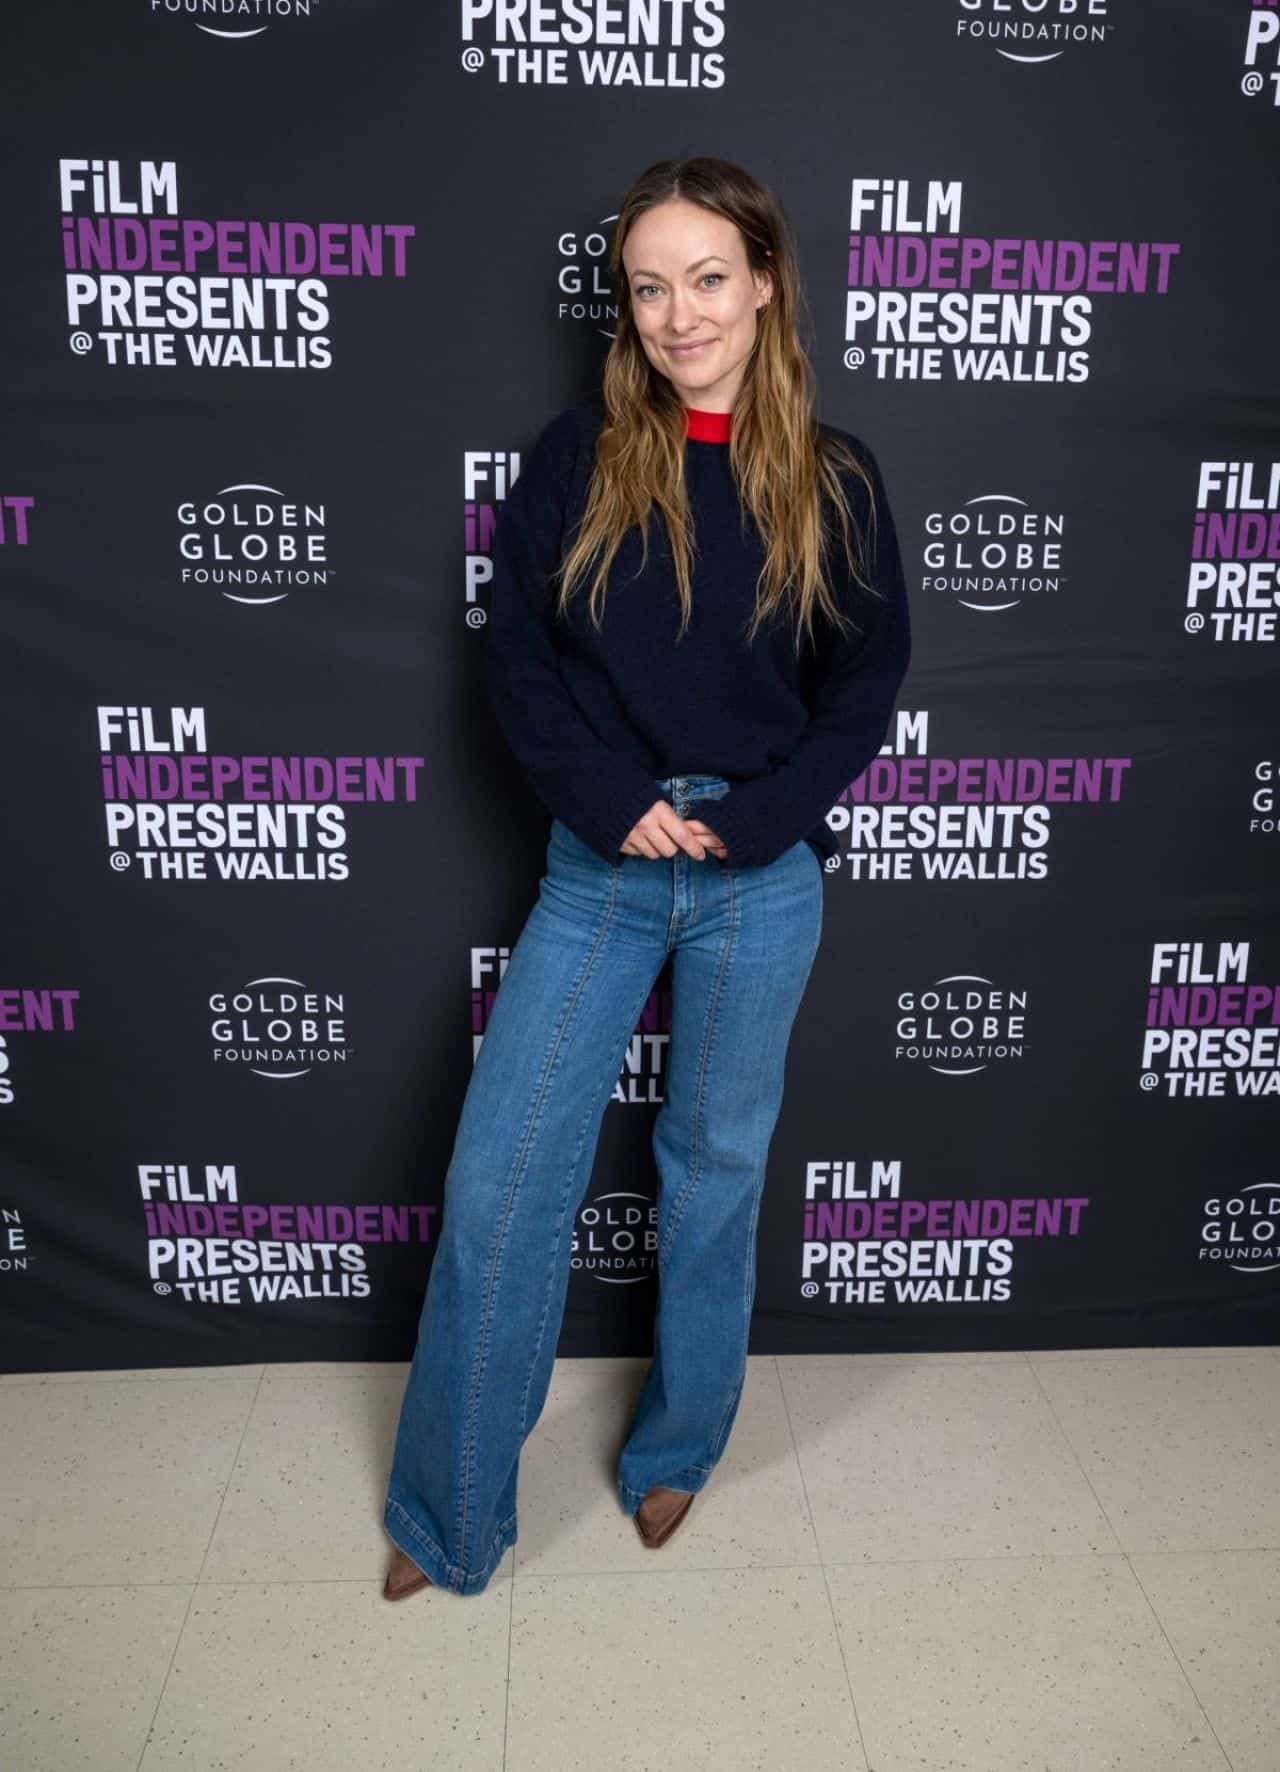 Olivia Wilde, a Vision of Class in Sweater and Jeans at LA Event